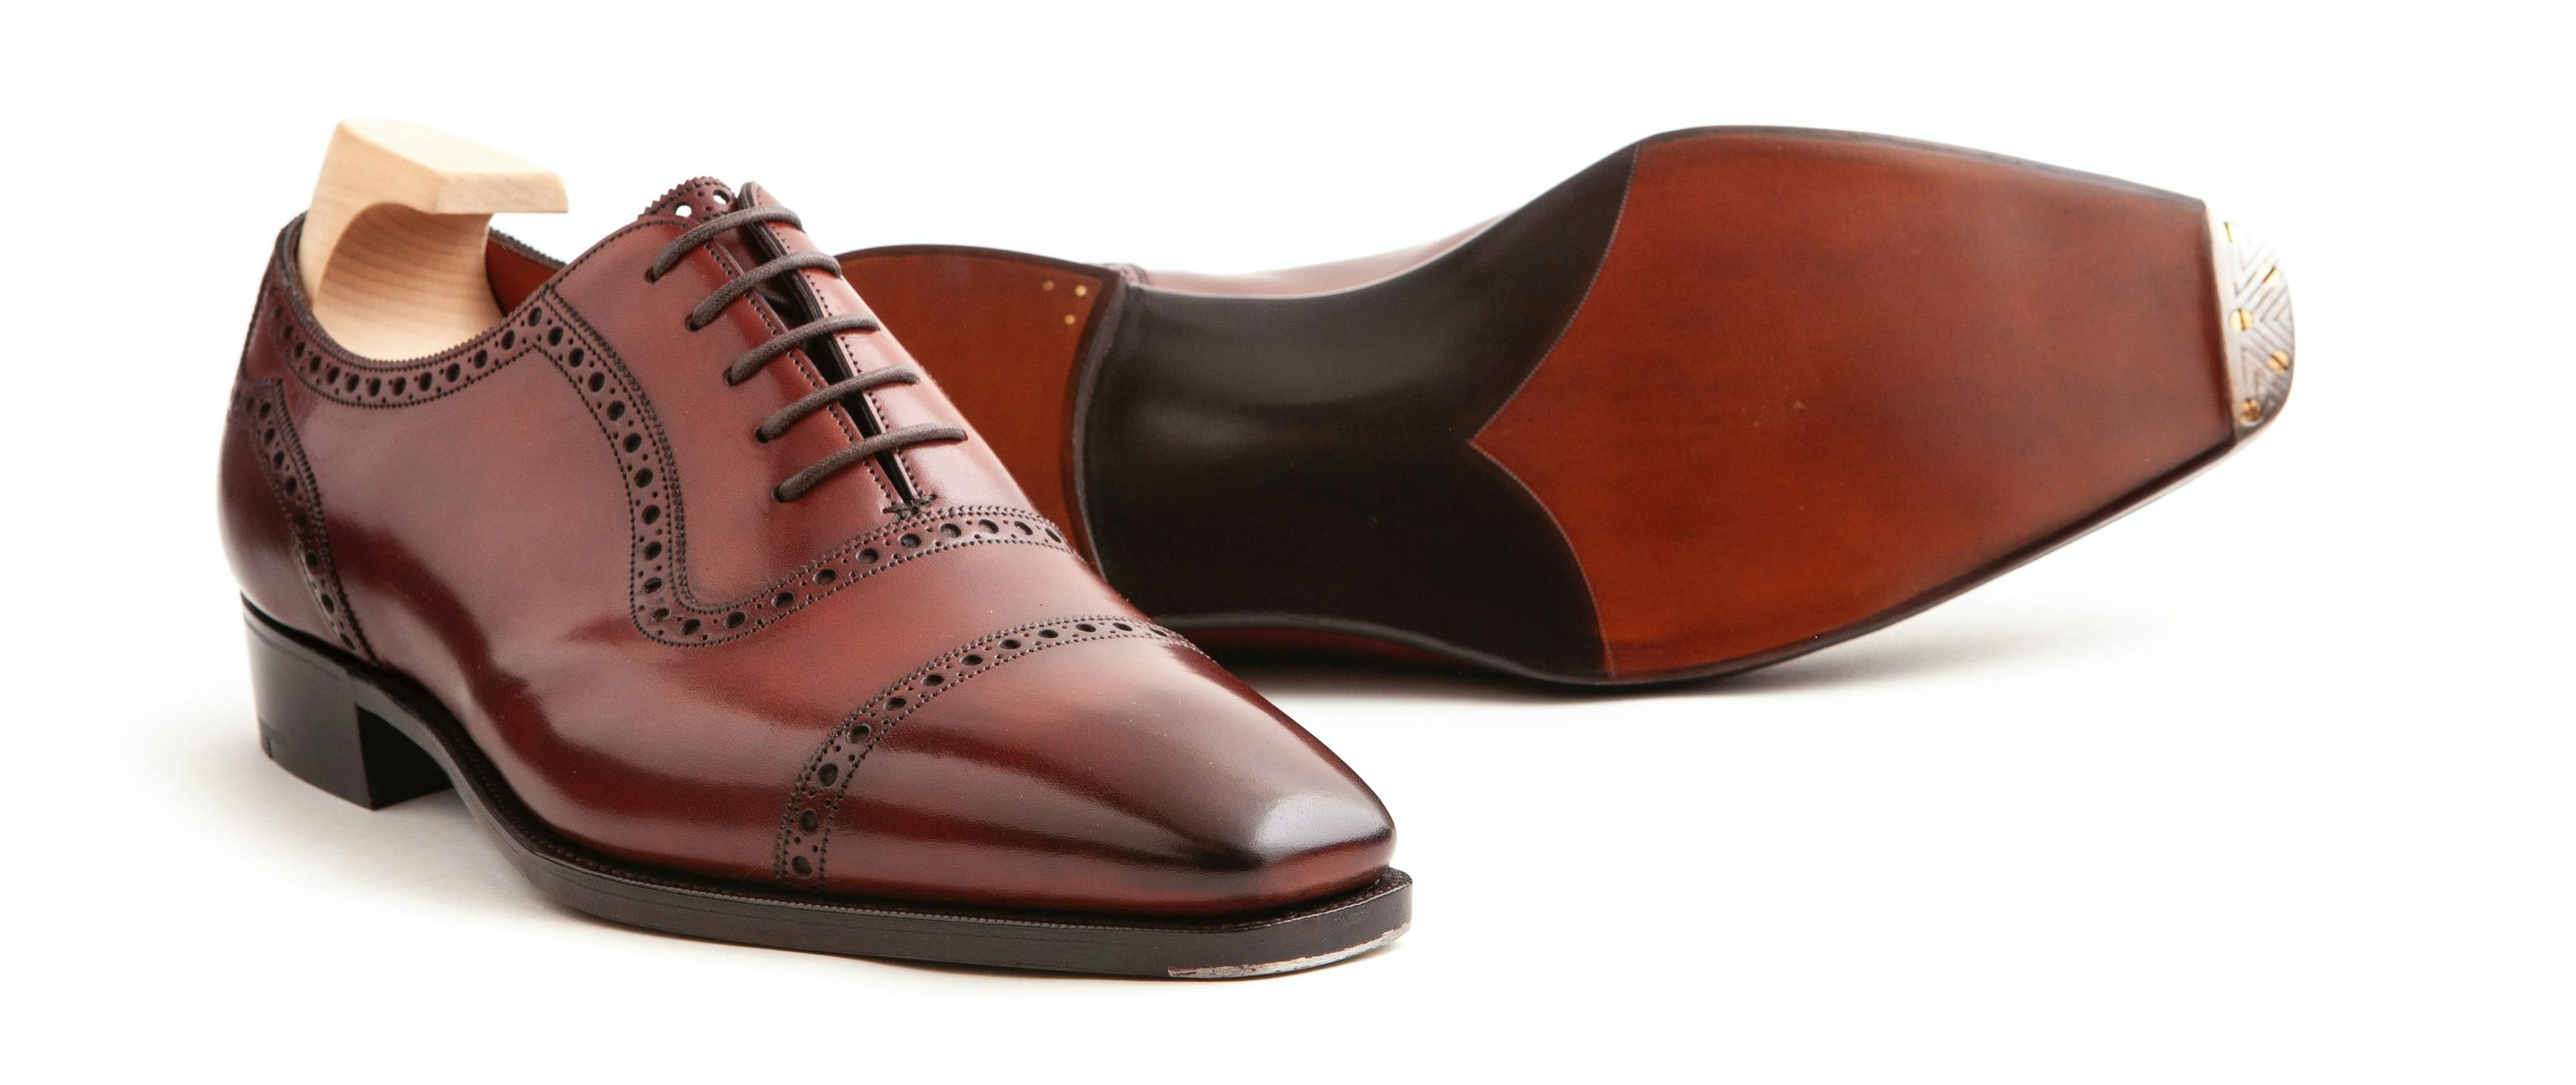 Gaziano & Girling St. James in vintage cherry calfskin, with a view of its single leather soles and sunken metal toe plates.